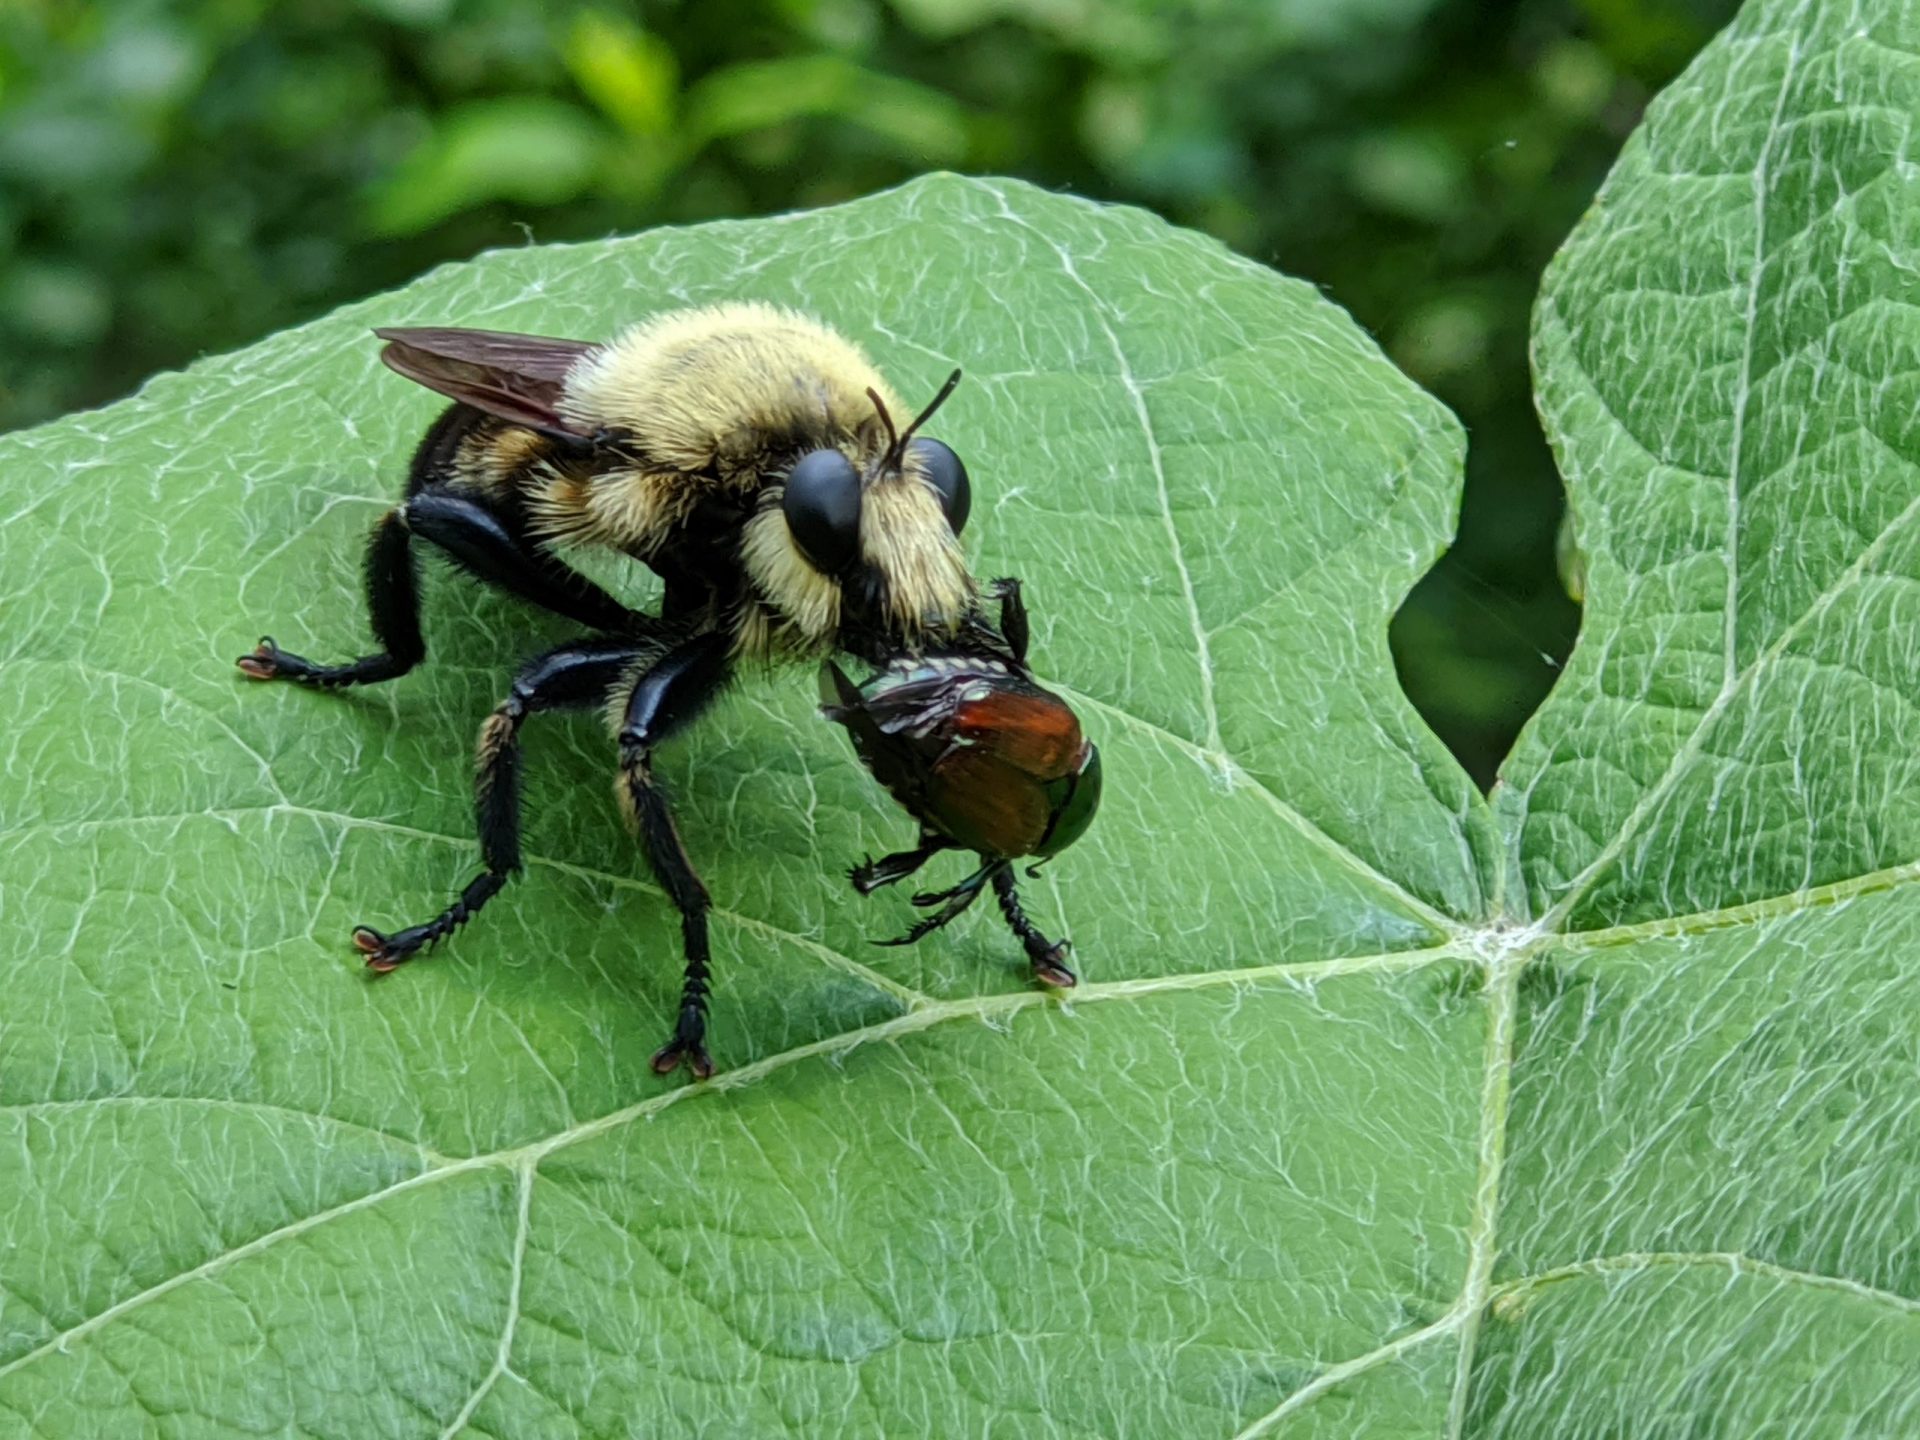 Fly with Japanese Beetle in jaws - Bee mimic - June 2020